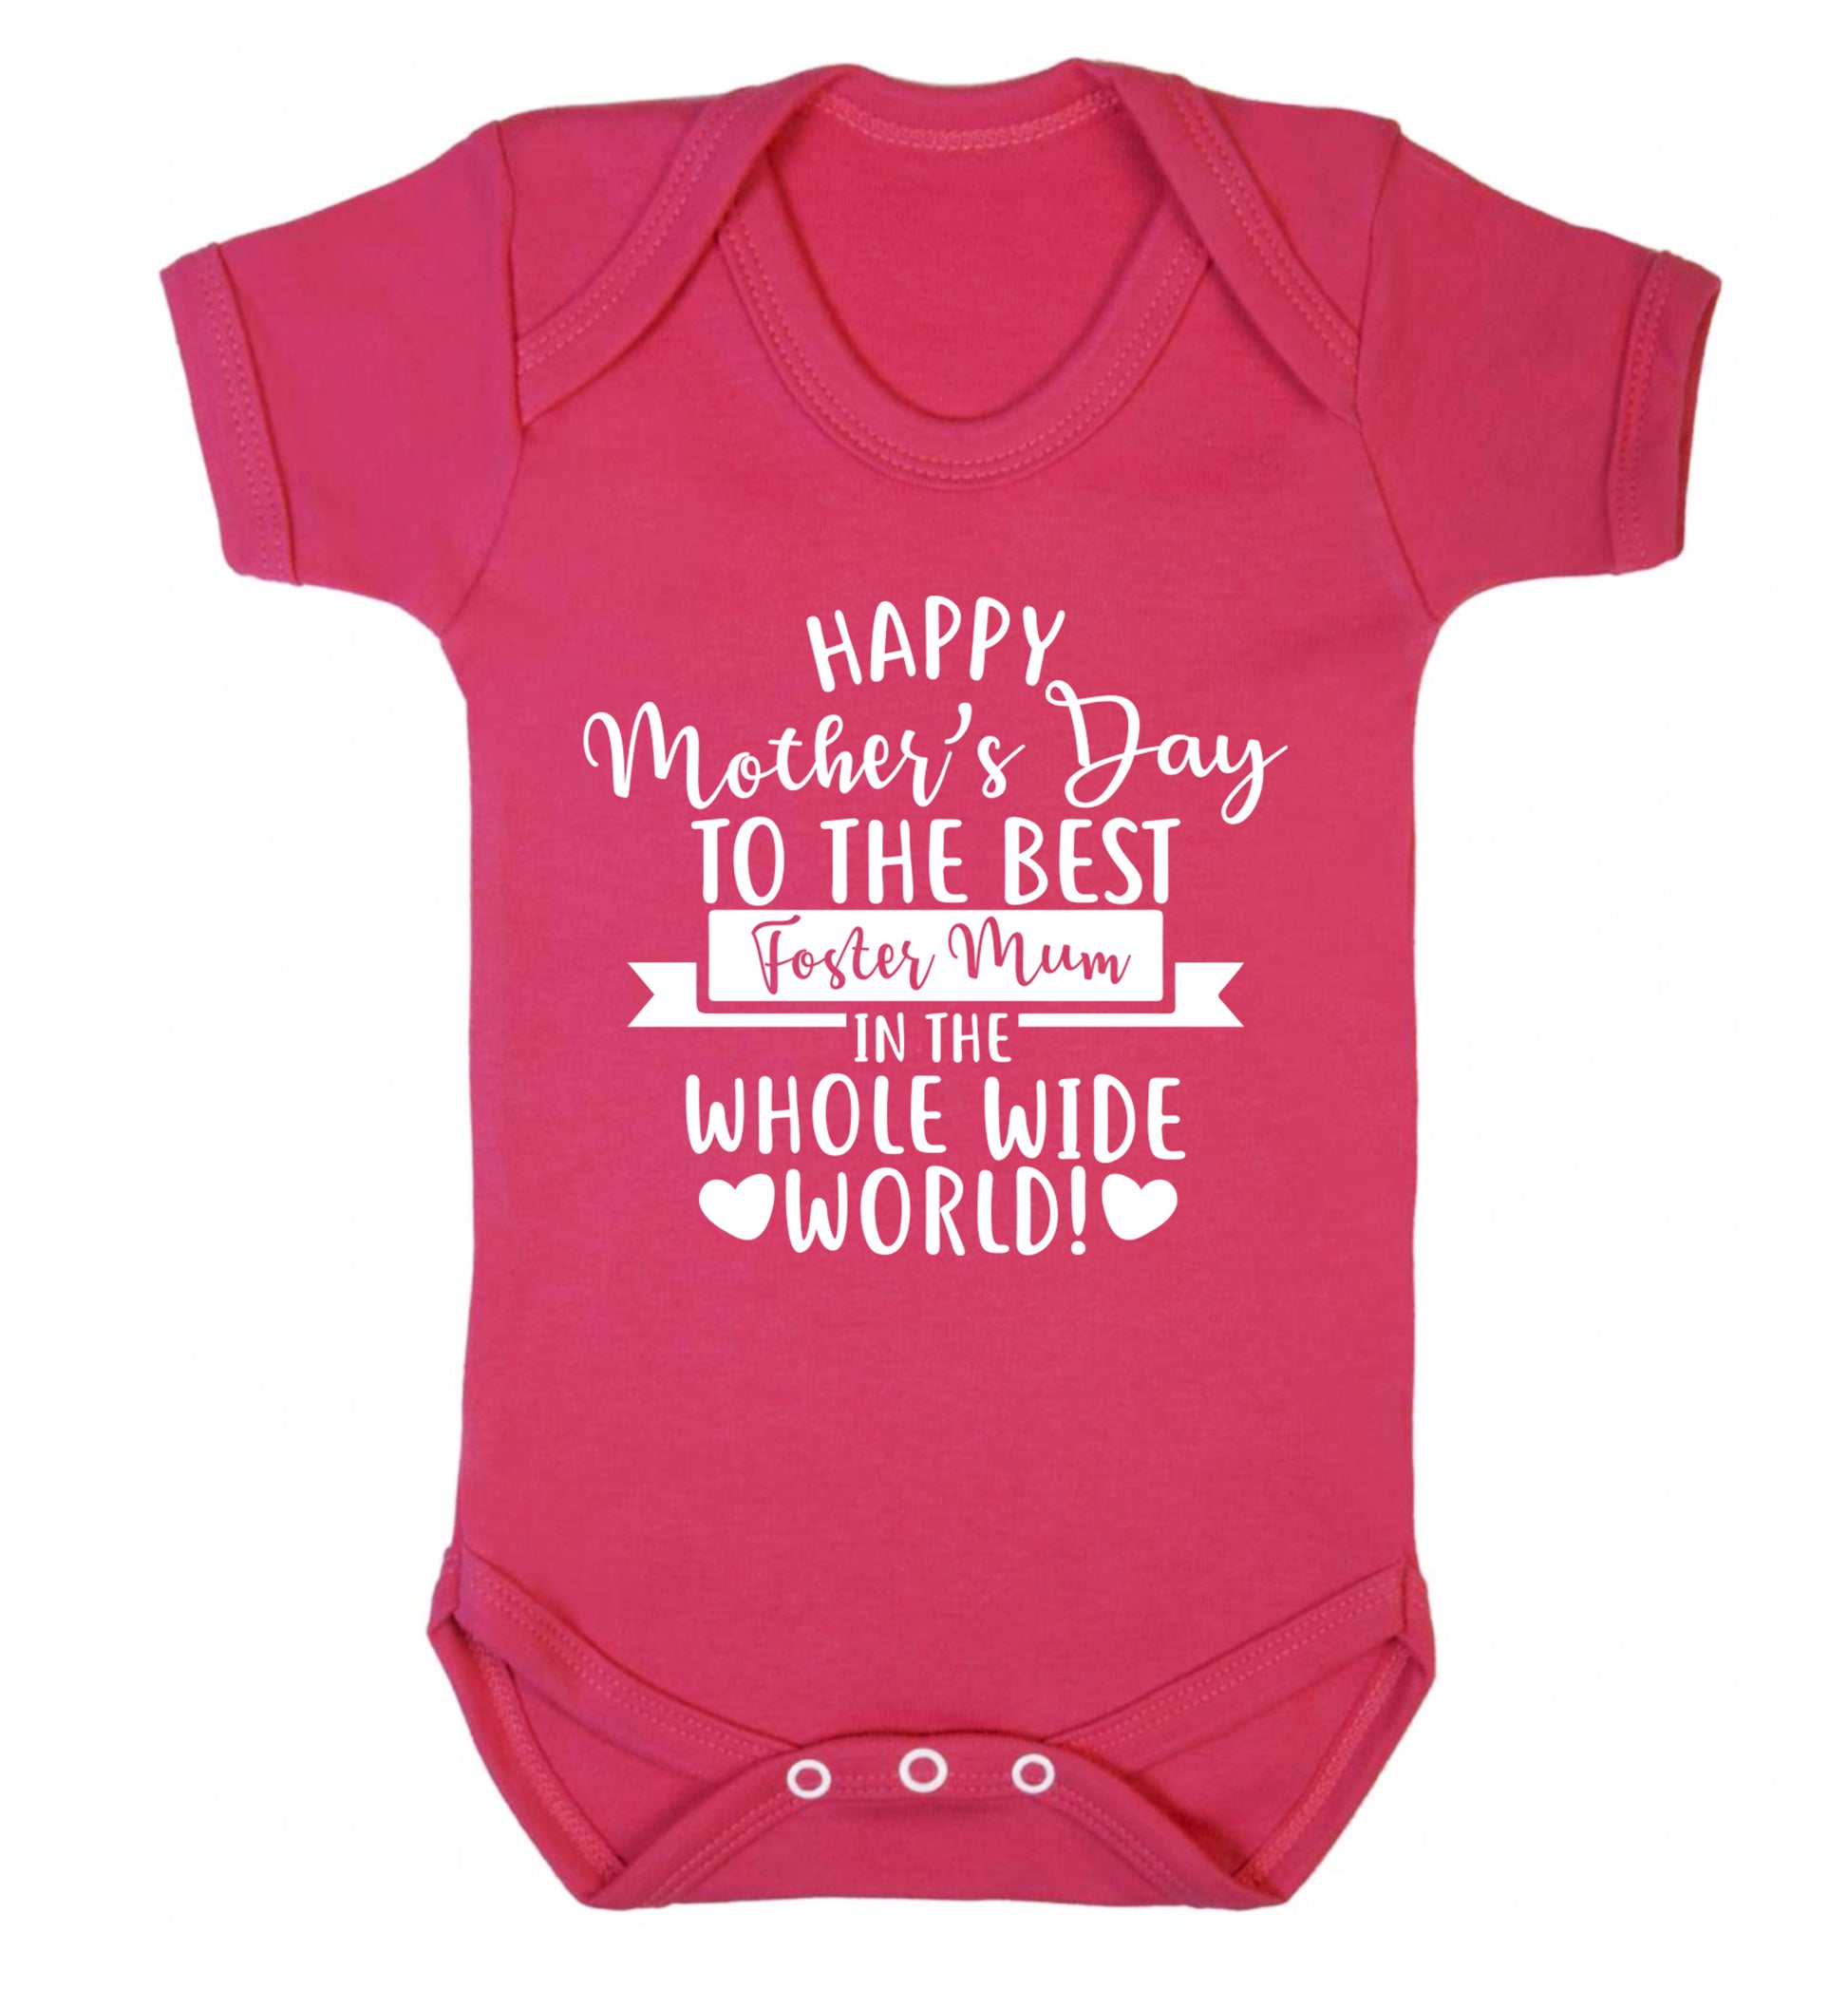 Happy mother's day to the best foster mum in the world Baby Vest dark pink 18-24 months